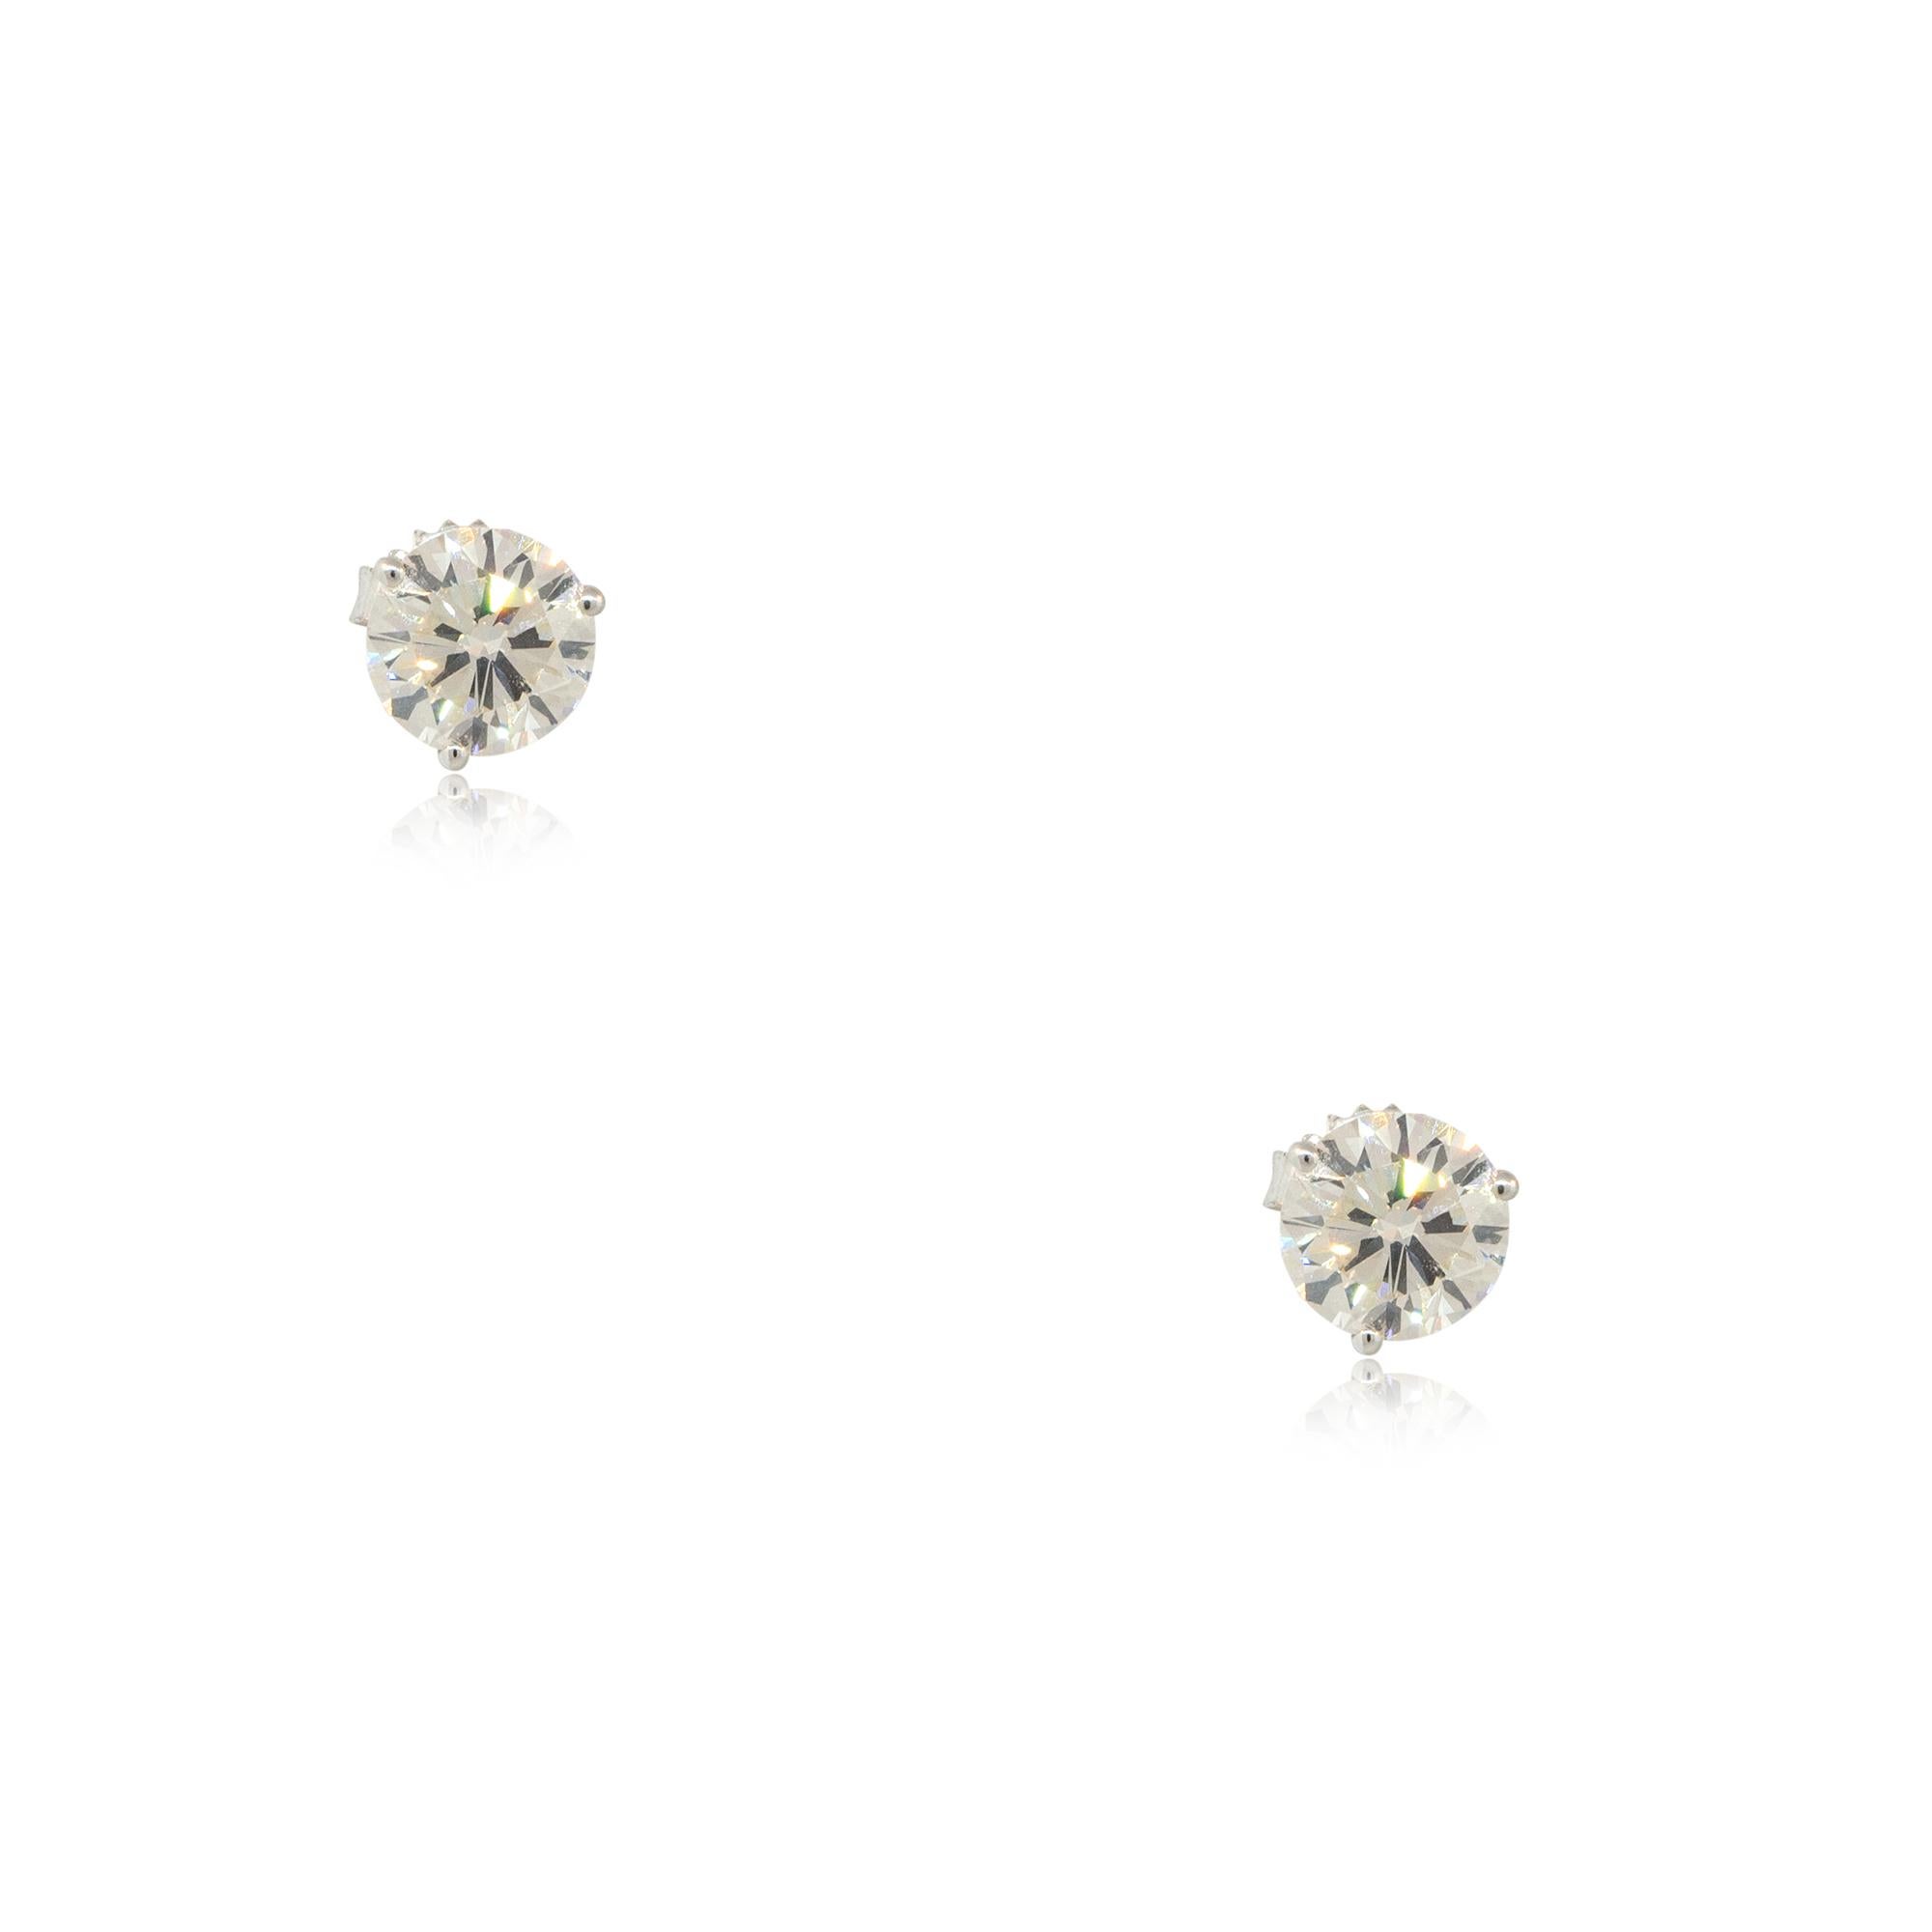 Material: Studs: 14k White Gold, Stud Jackets: 18k White Gold
Diamond Details: Main Diamonds are approx. 3.21ctw. Stud Jackets  are approx. 0.59ctw. Diamonds are H/I in color and SI in clarity
Earring Backs: Friction Backs
Weight: Studs: 1.3dwt,